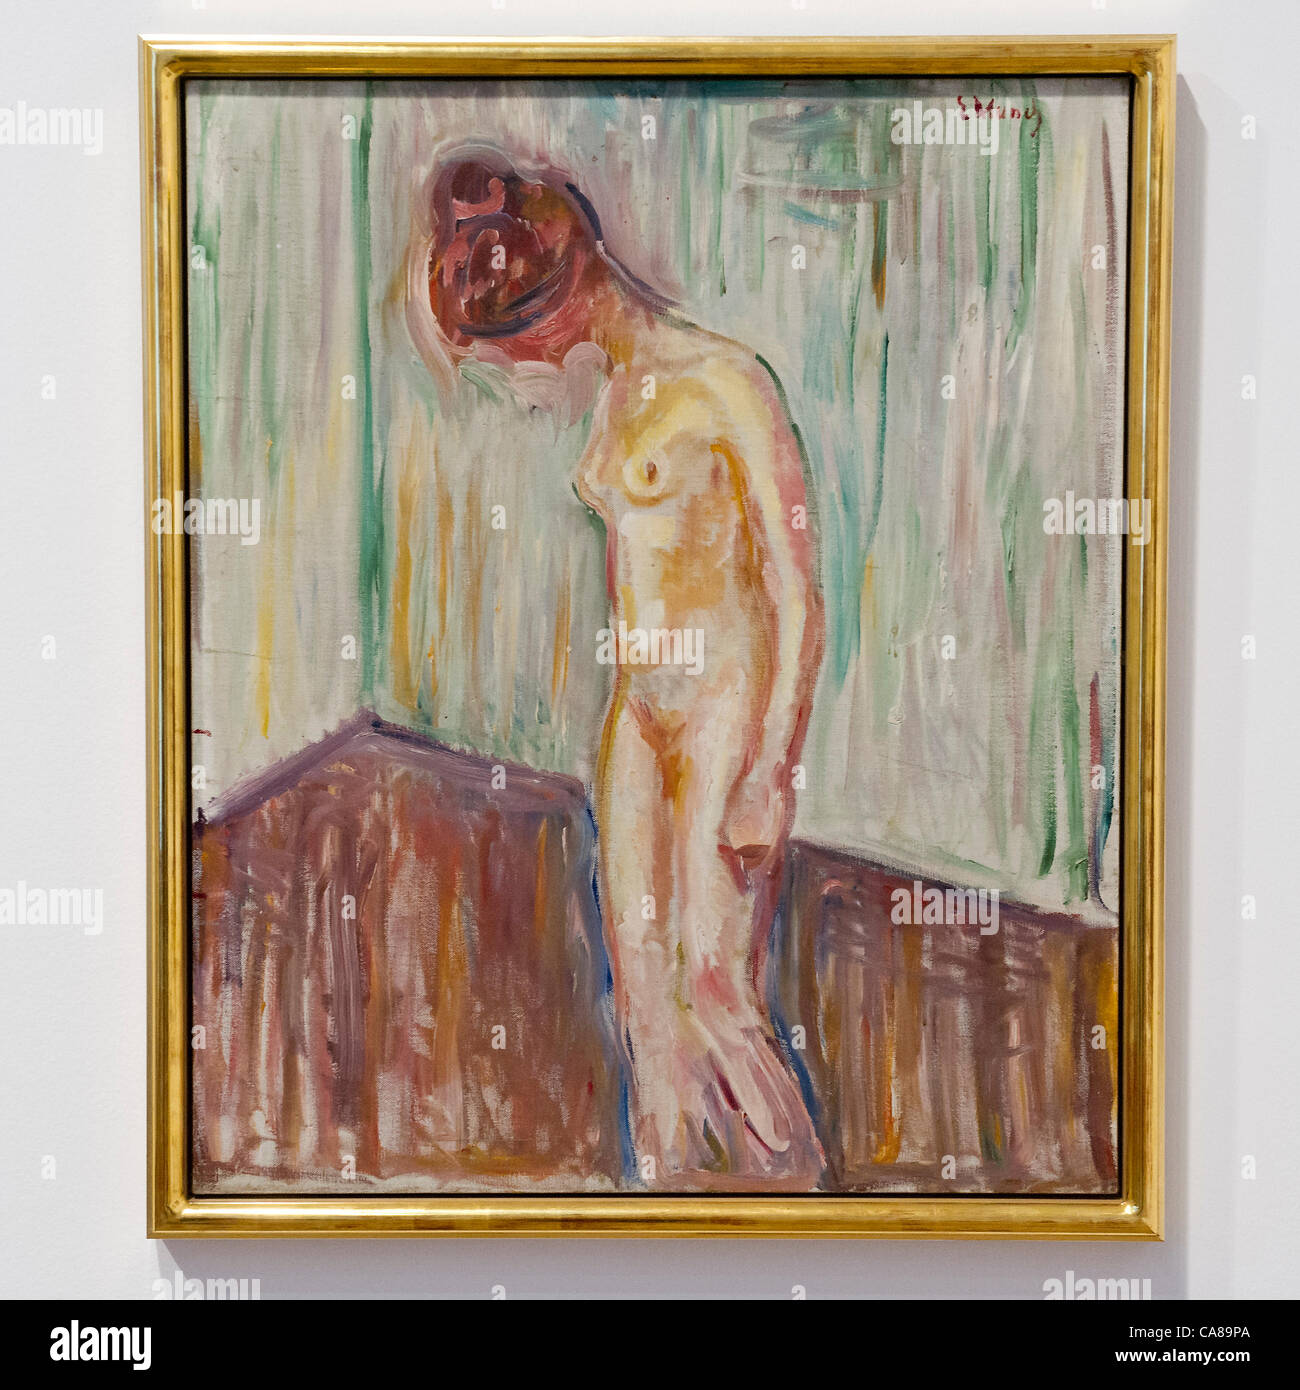 Weeping Woman 1907-9. Edvard Munch: The Modern Eye, an exhibition of the Norwegian artist's work at the Tate Modern, London, UK. The exhibition runs from 28 June to 14 October. 26 June 2012. Stock Photo